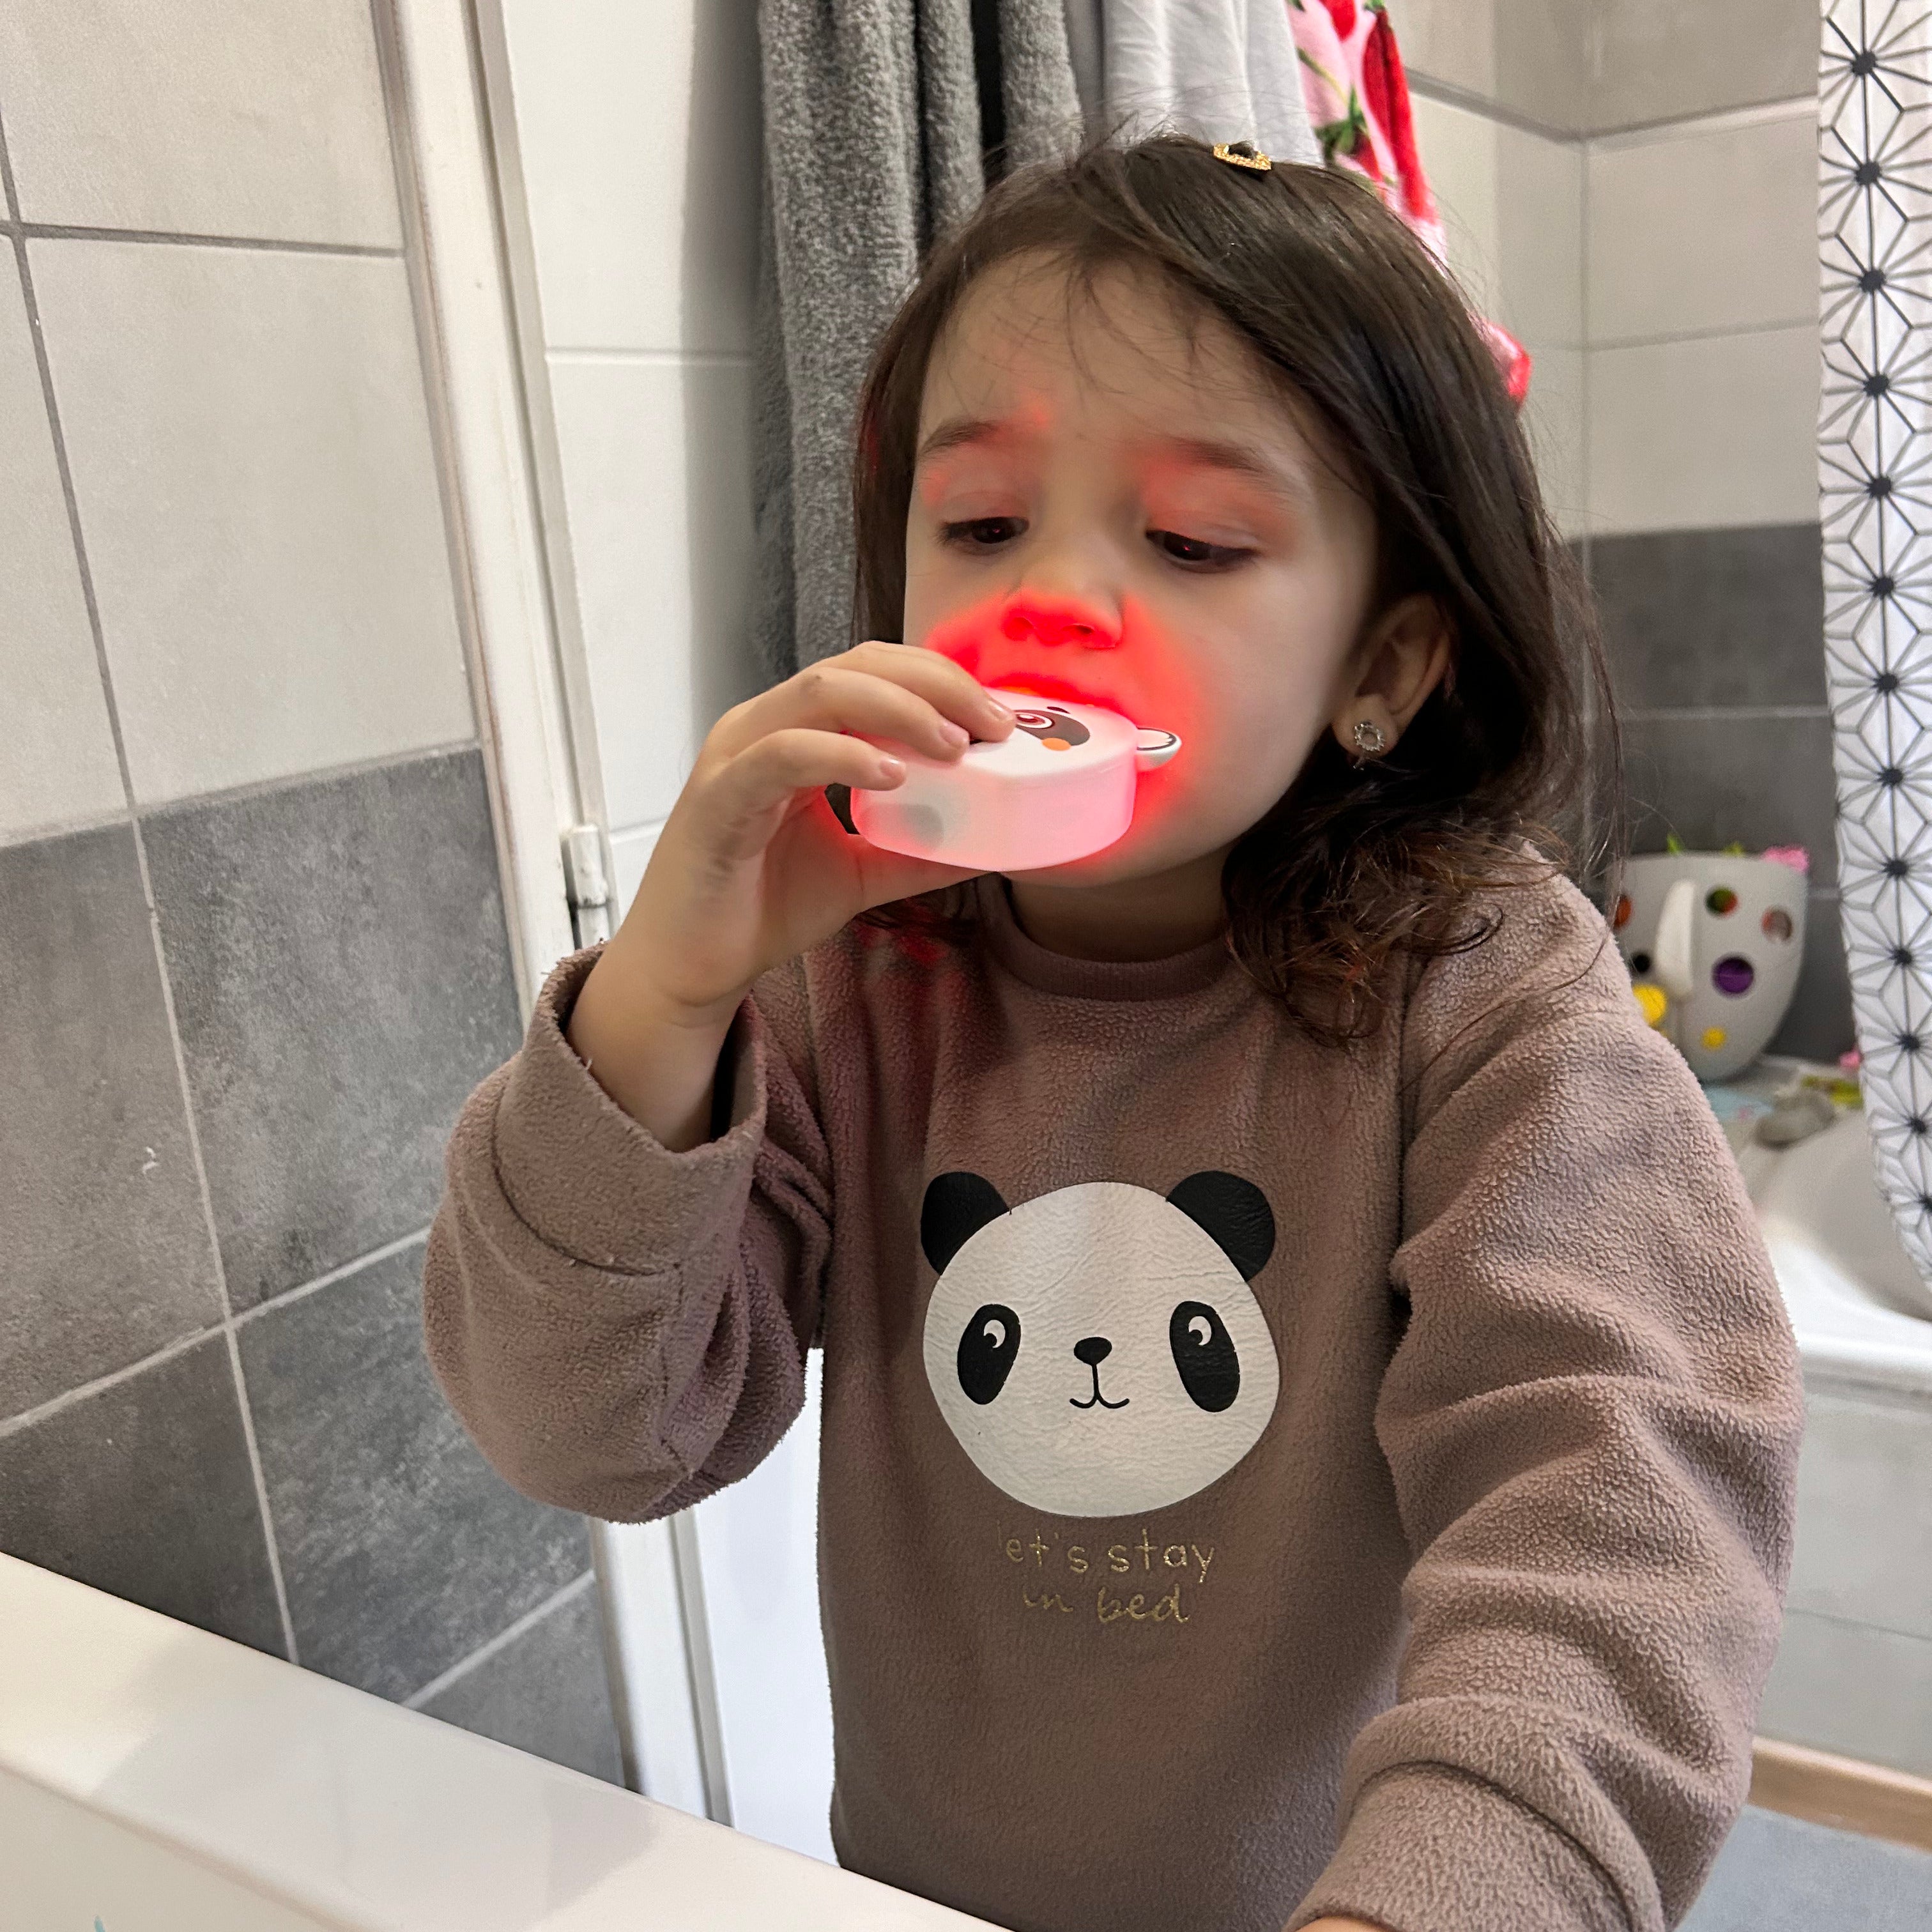 KiddoBrush – A new and effective way of brushing teeth